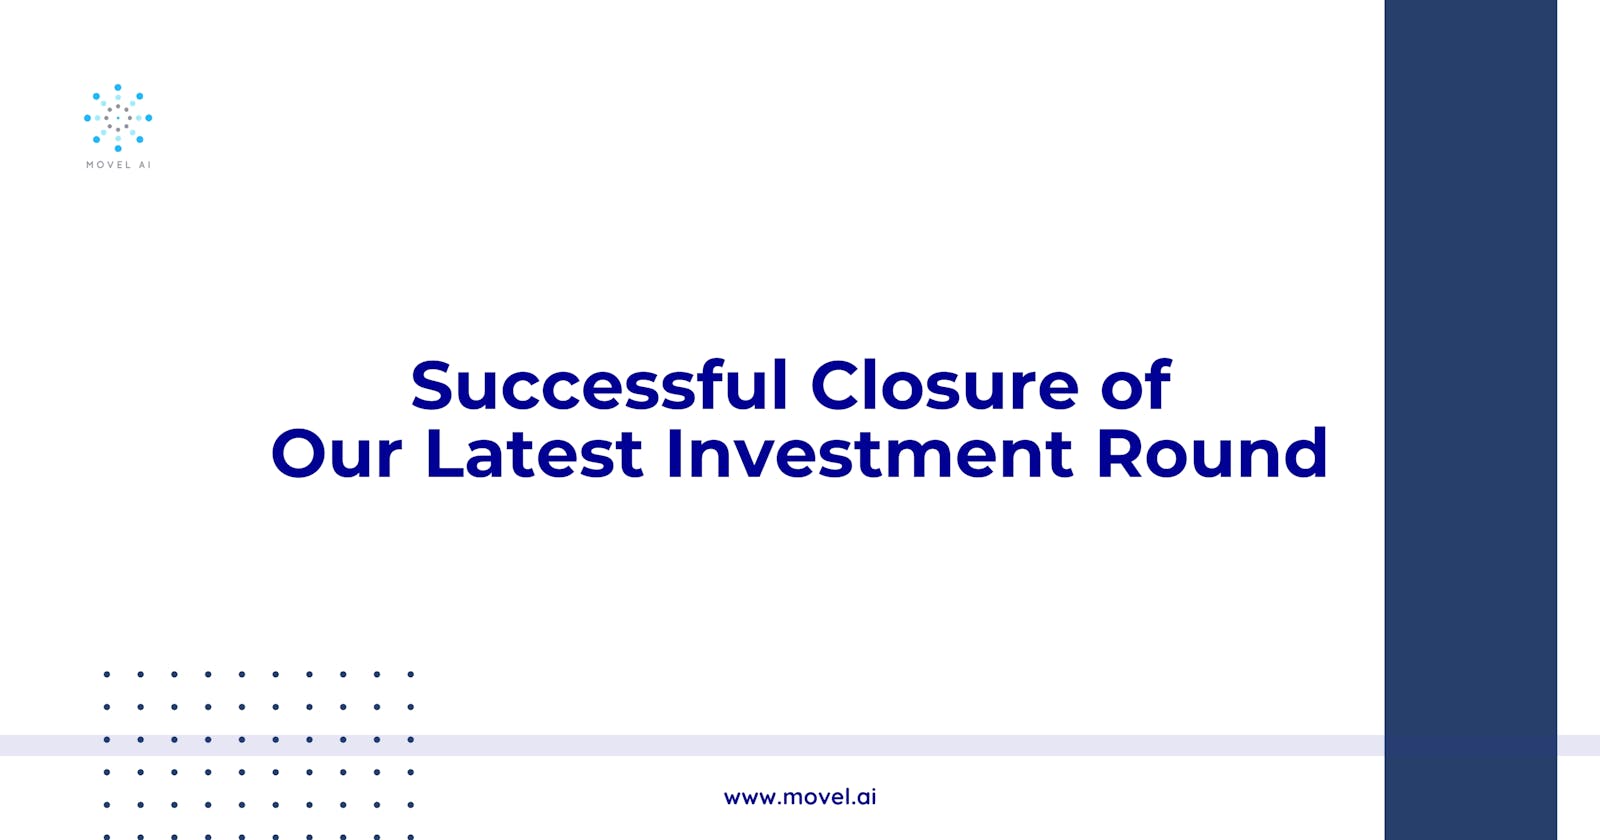 Successful Closure of Our Latest Investment Round